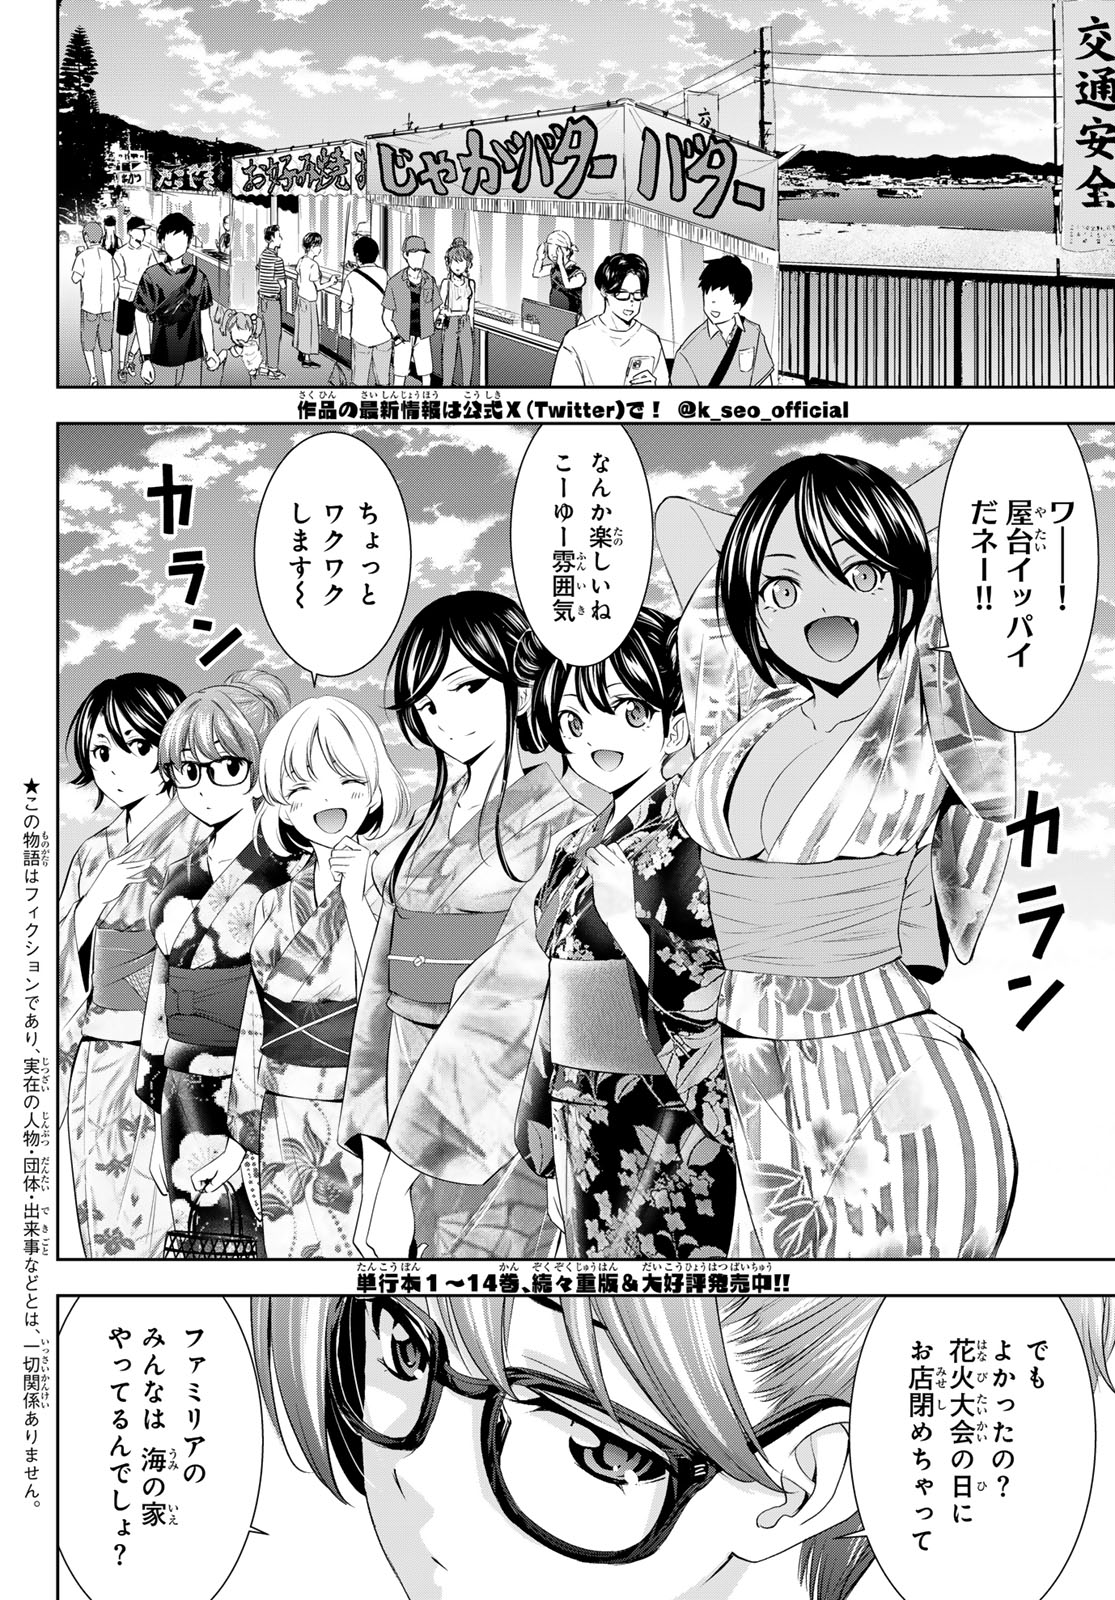 Megami no Cafe Terace - Chapter 149 - Page 2